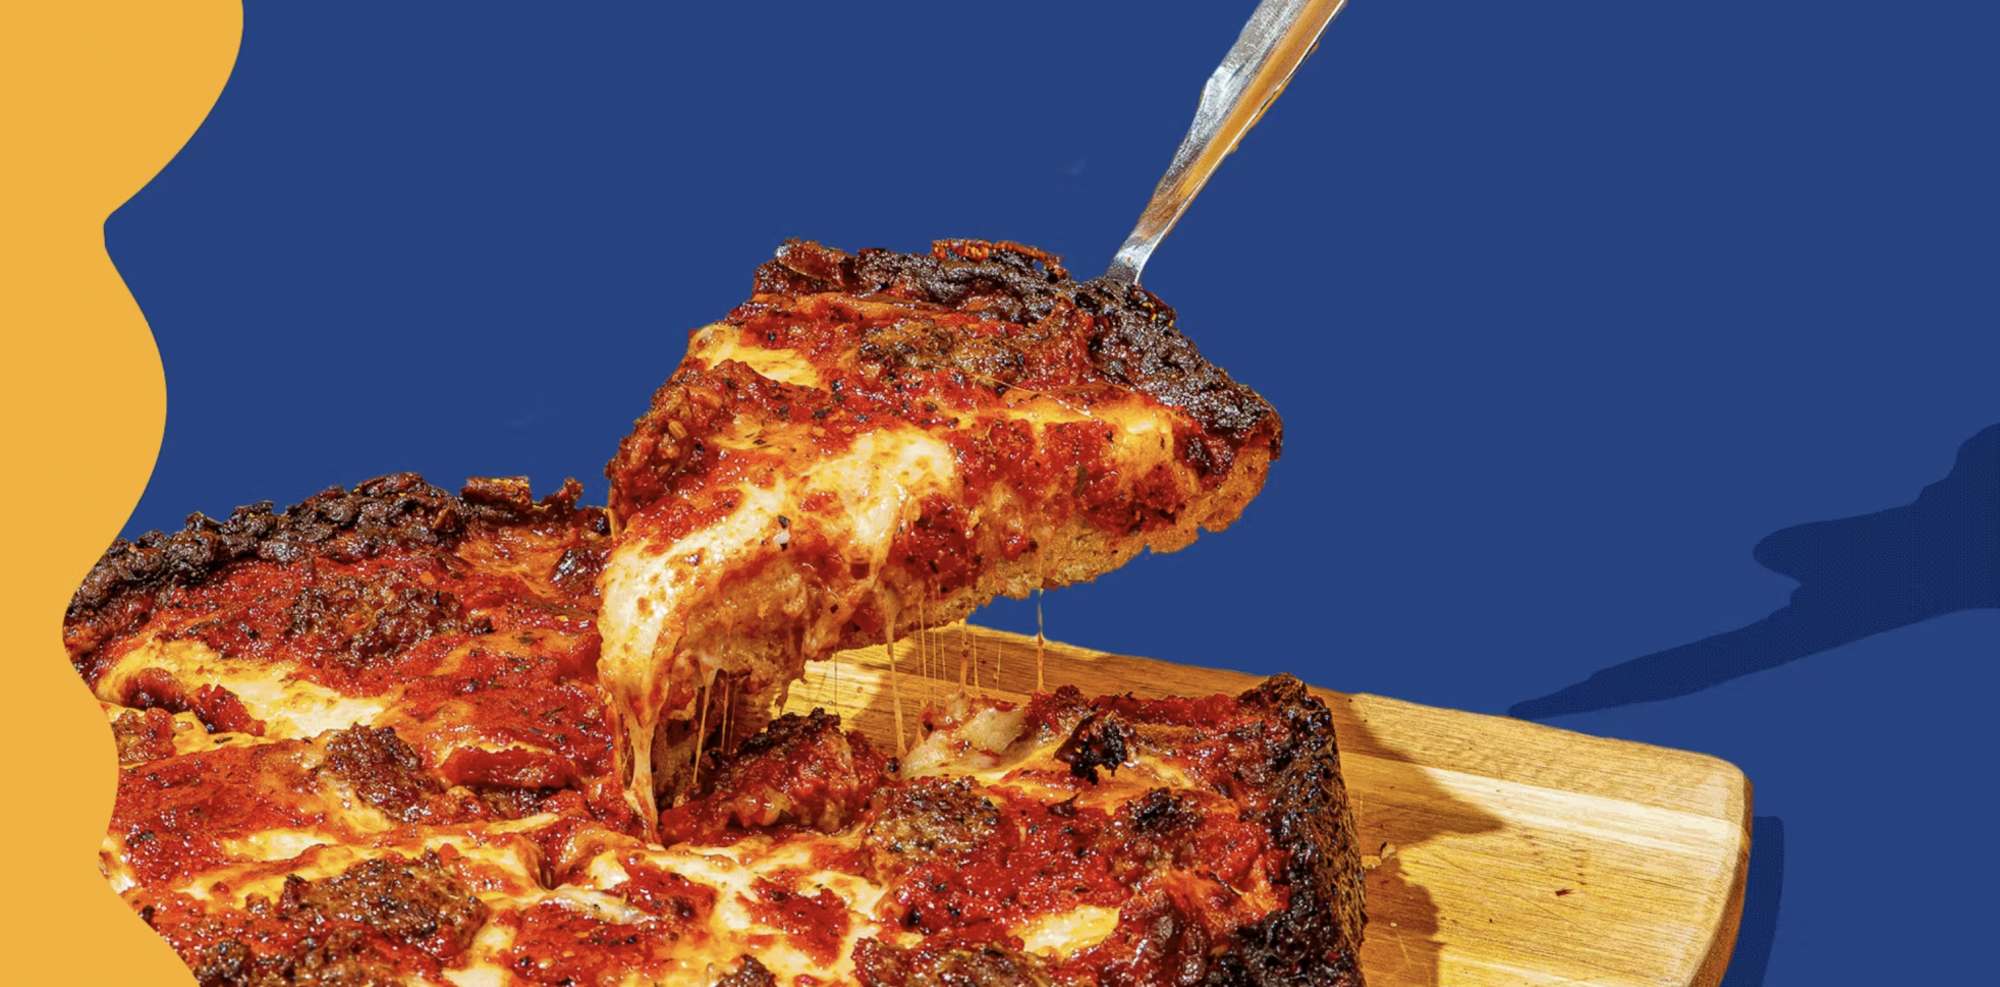 Spatula removing a piece of pizza from a whole pizza